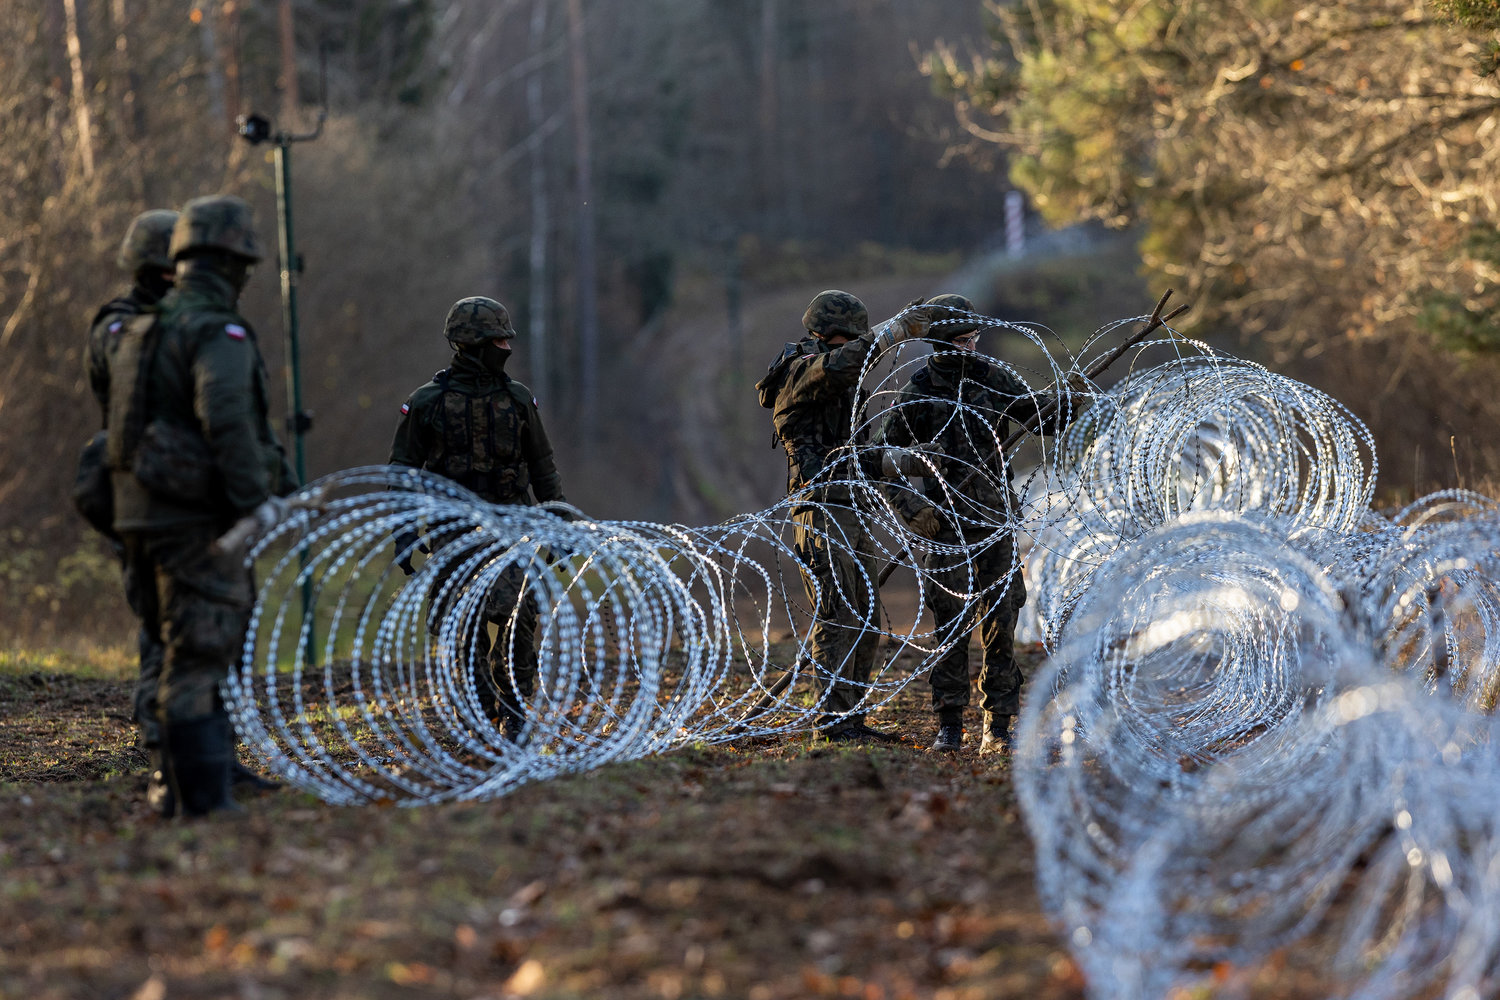 Polish army soldiers installing concertina wire at Poland's border with Russian exclave Kaliningrad on Monday, Nov. 14, 2022, in Goldap, Poland. The project comes after Moscow's aviation authority started to launch flights from the Middle East and North Africa to Kaliningrad, according to Poland's Defense Minister Mariusz Blaszczak. (Paulius Peleckis/Getty Images/TNS)